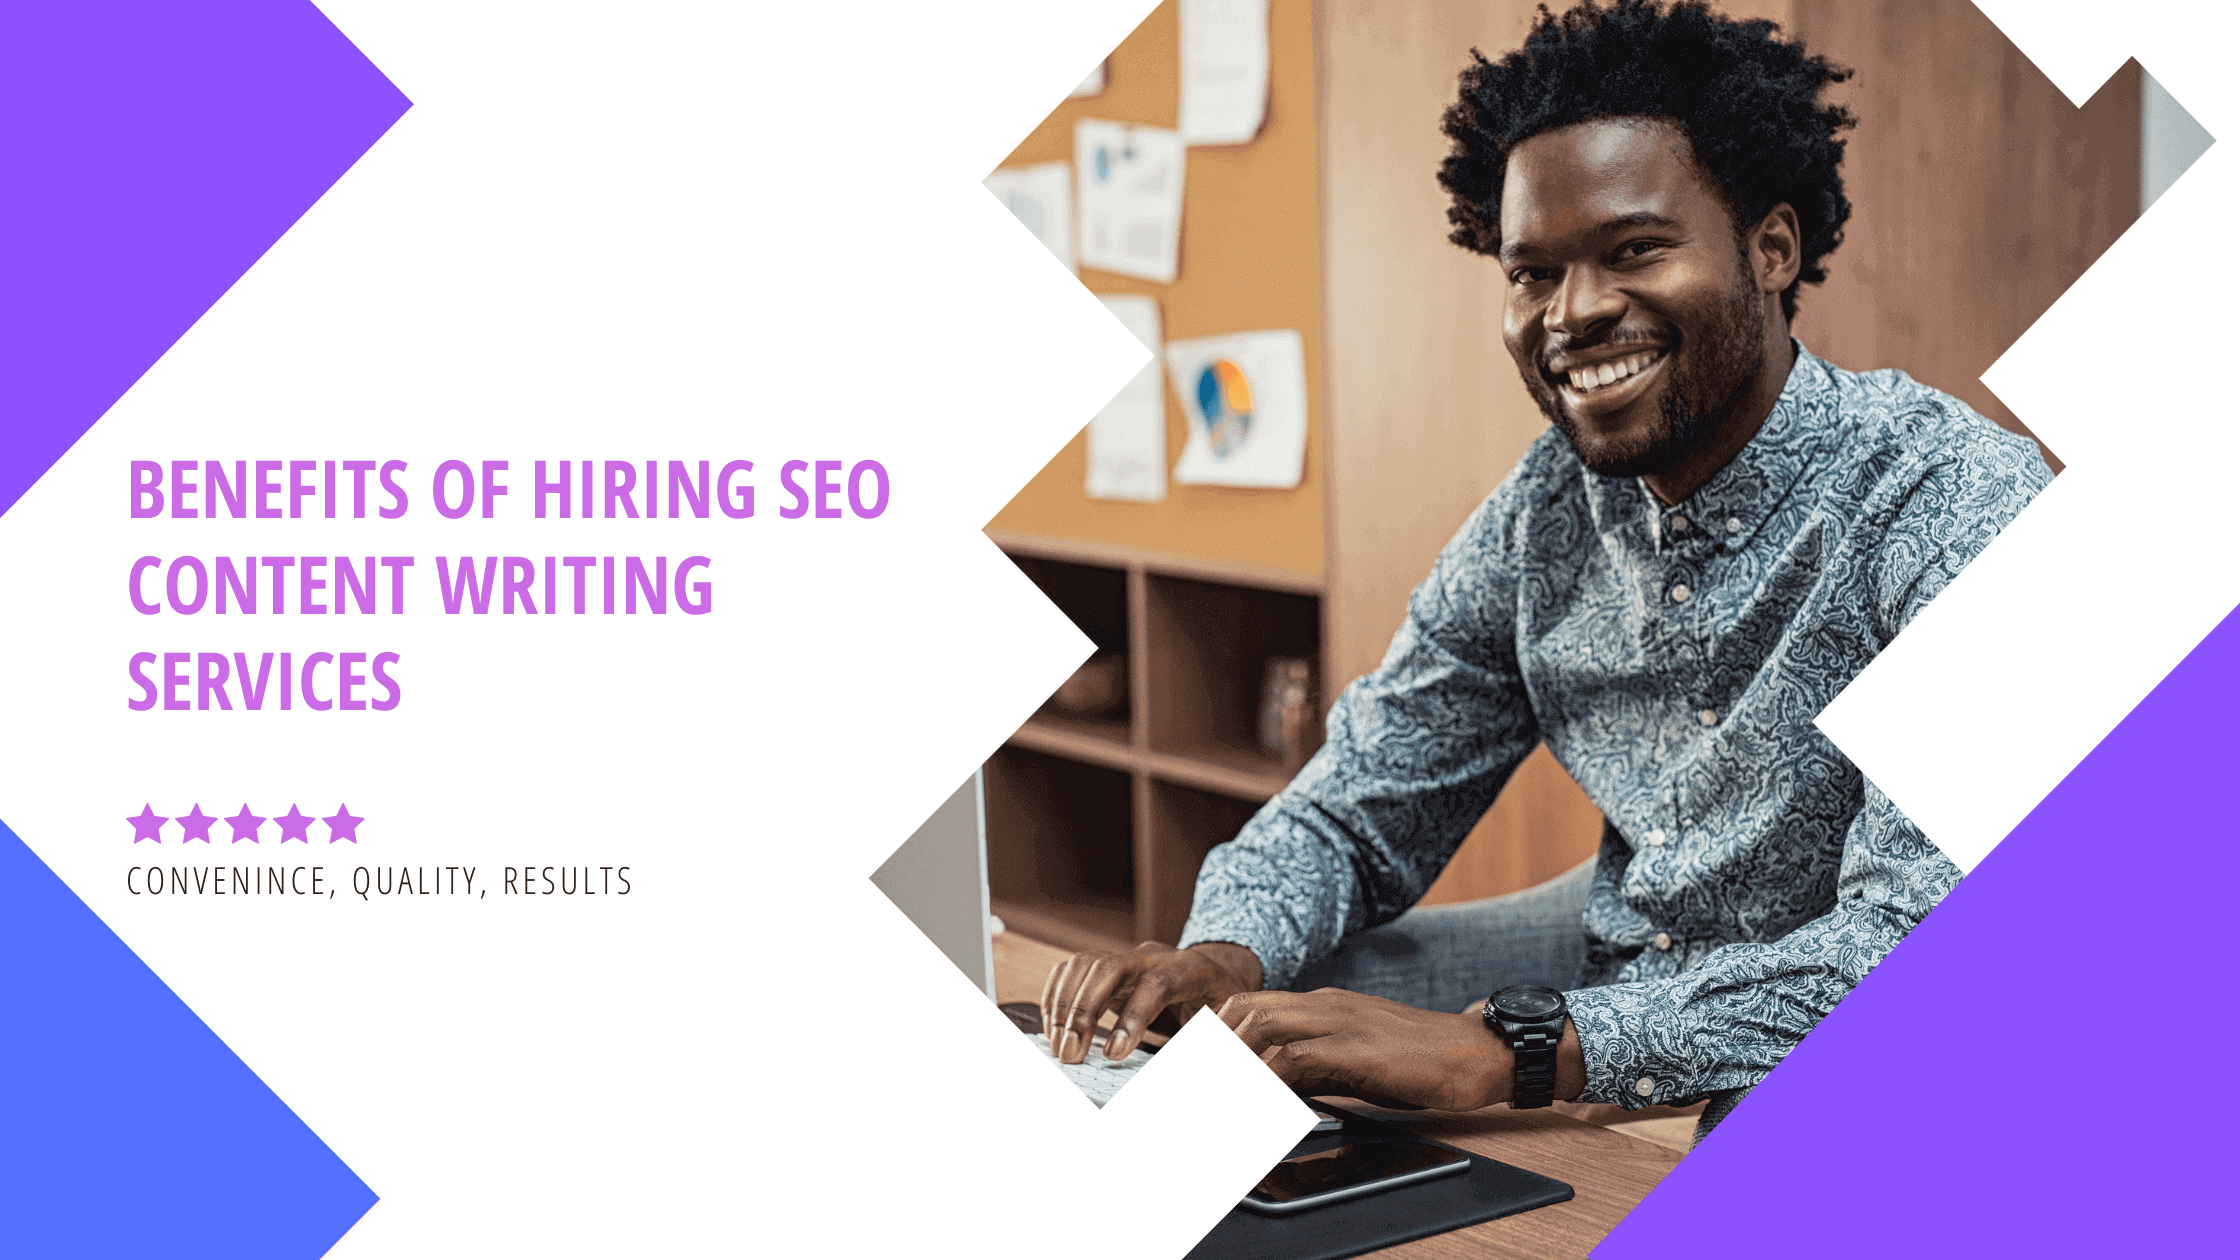 8 Benefits of Hiring SEO Content Writing Services for Your Business